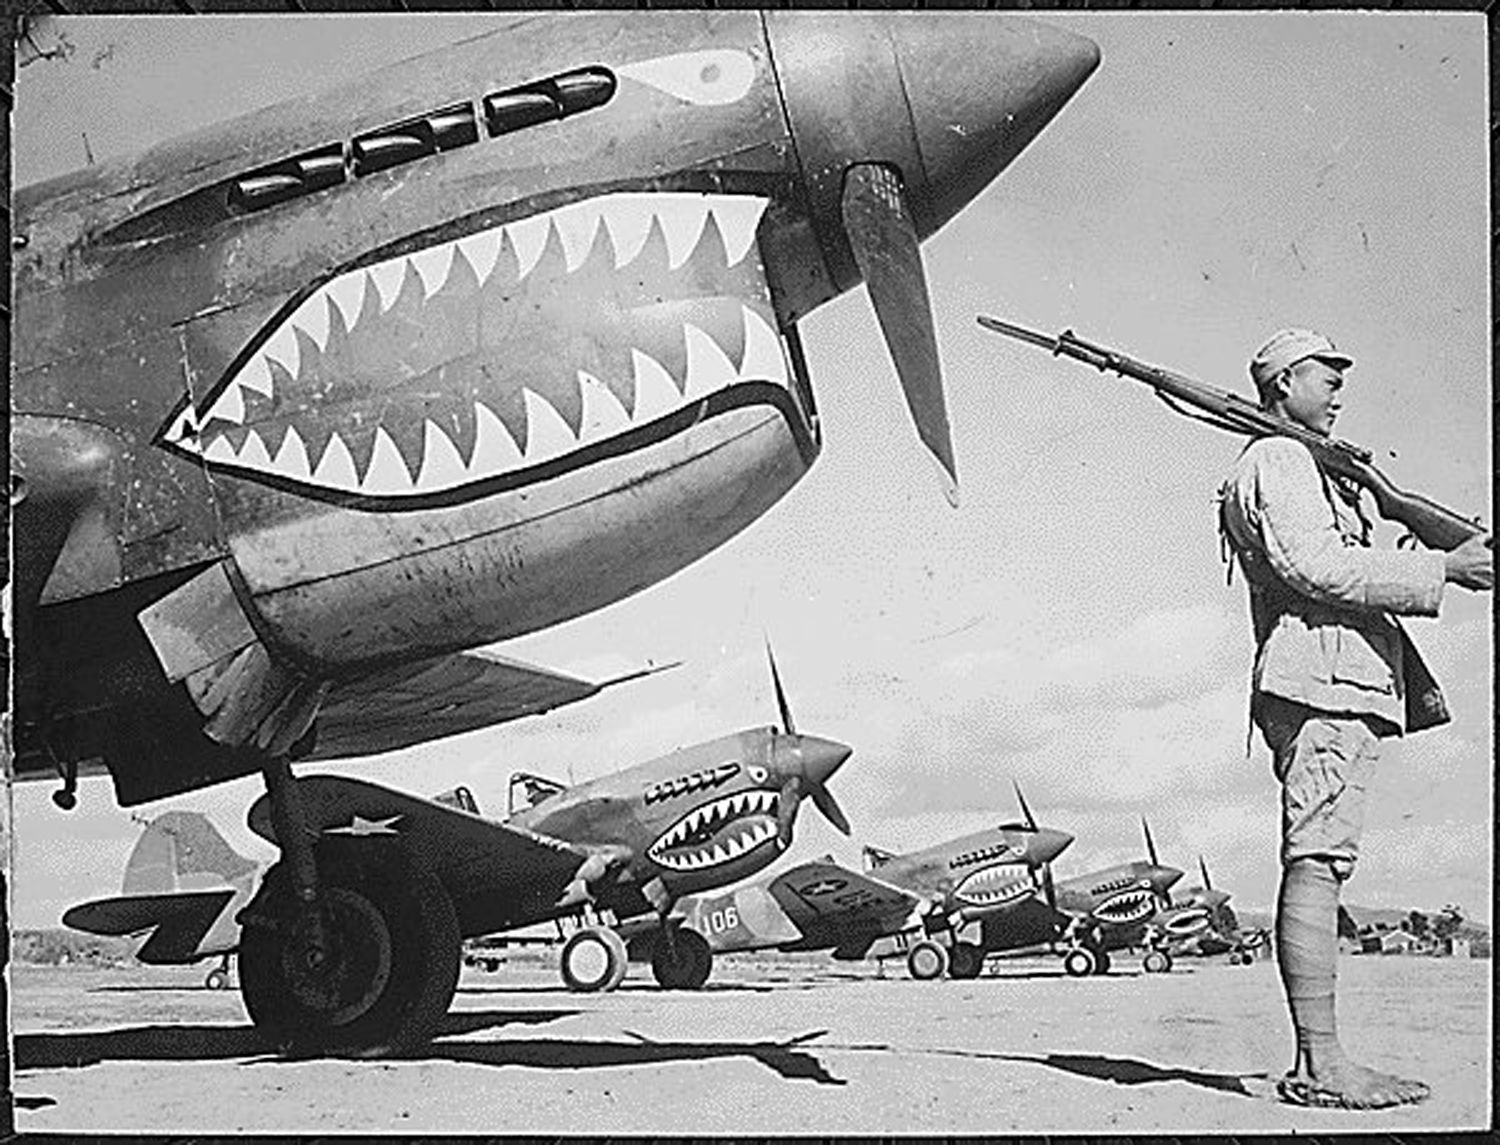 p 40 flying tigers insignia